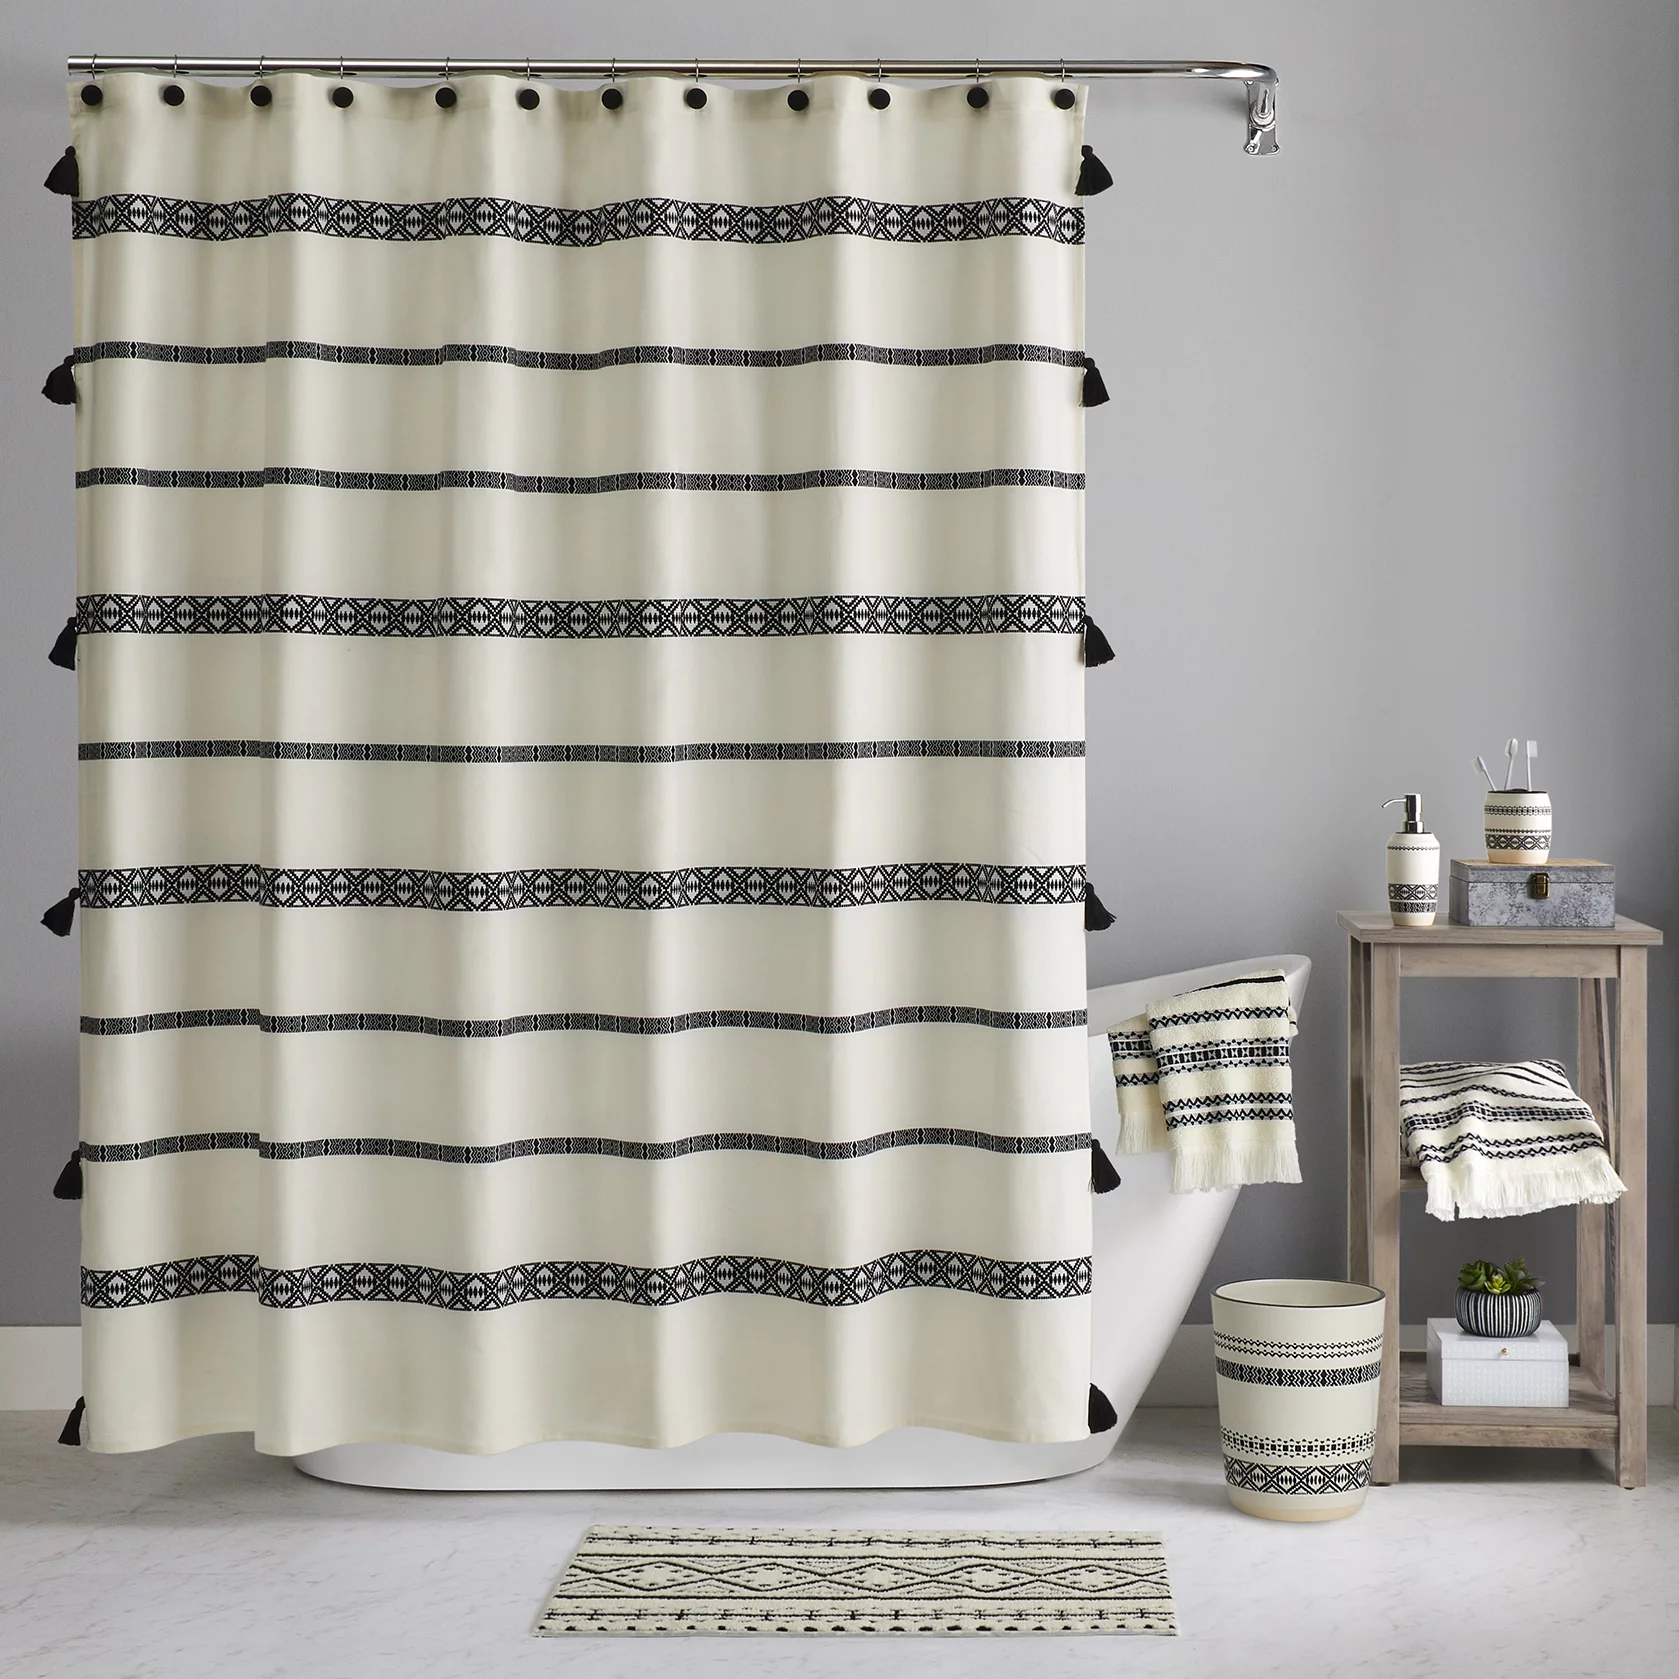 Better Homes and Gardens Boho Chic Shower Curtain